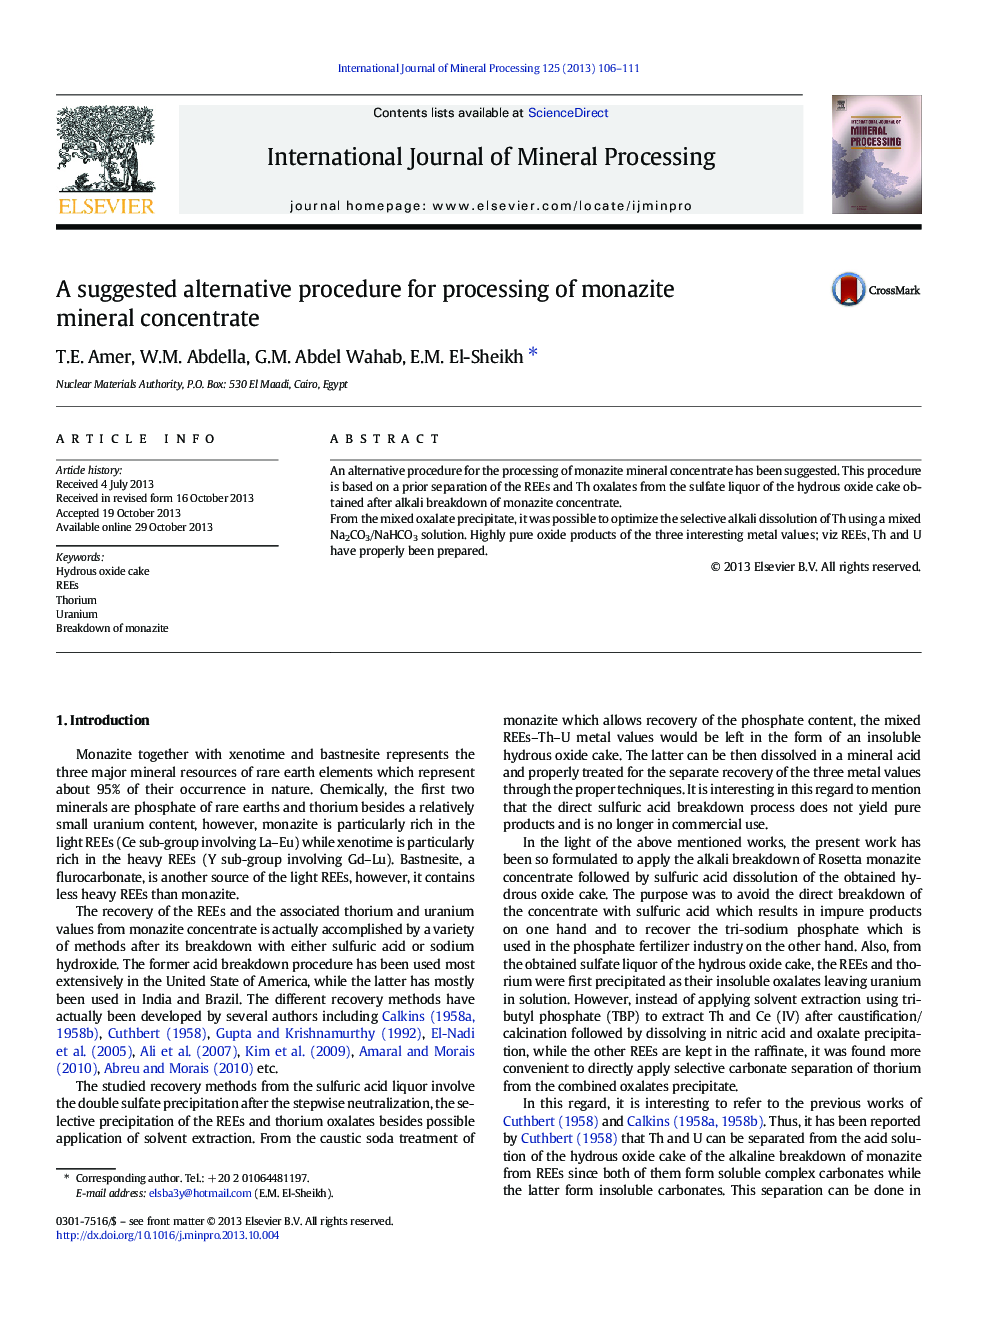 A suggested alternative procedure for processing of monazite mineral concentrate